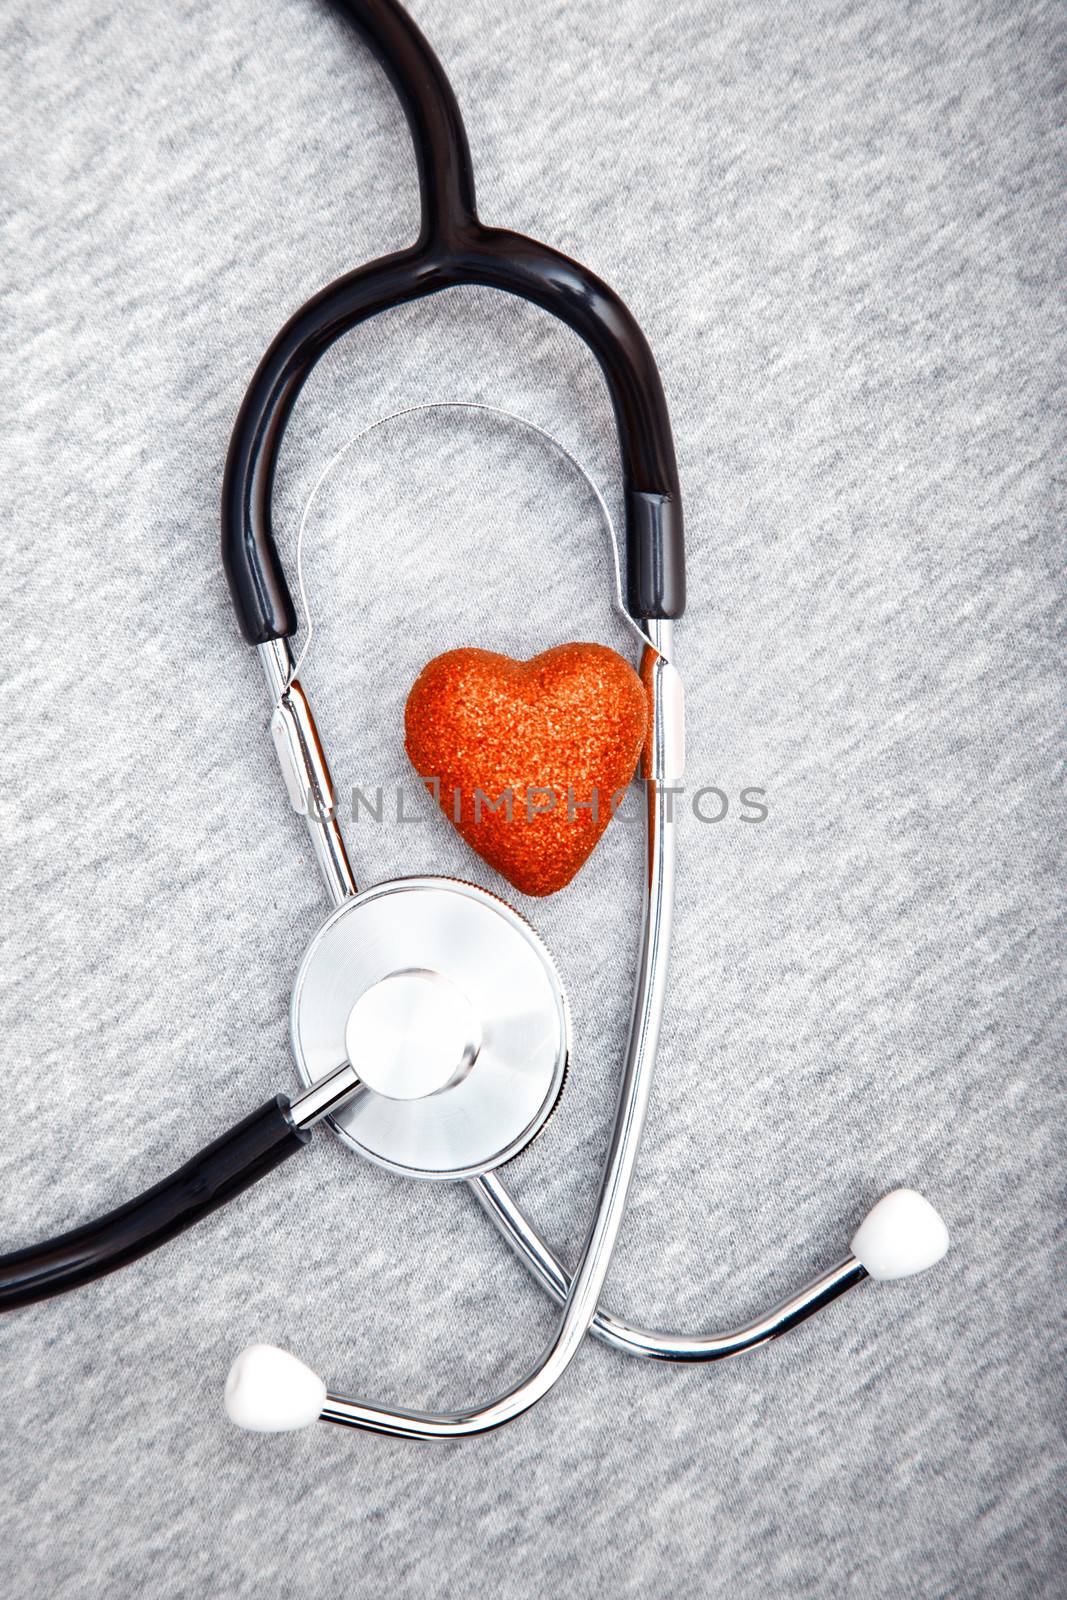 Stethoscope and heart by Novic